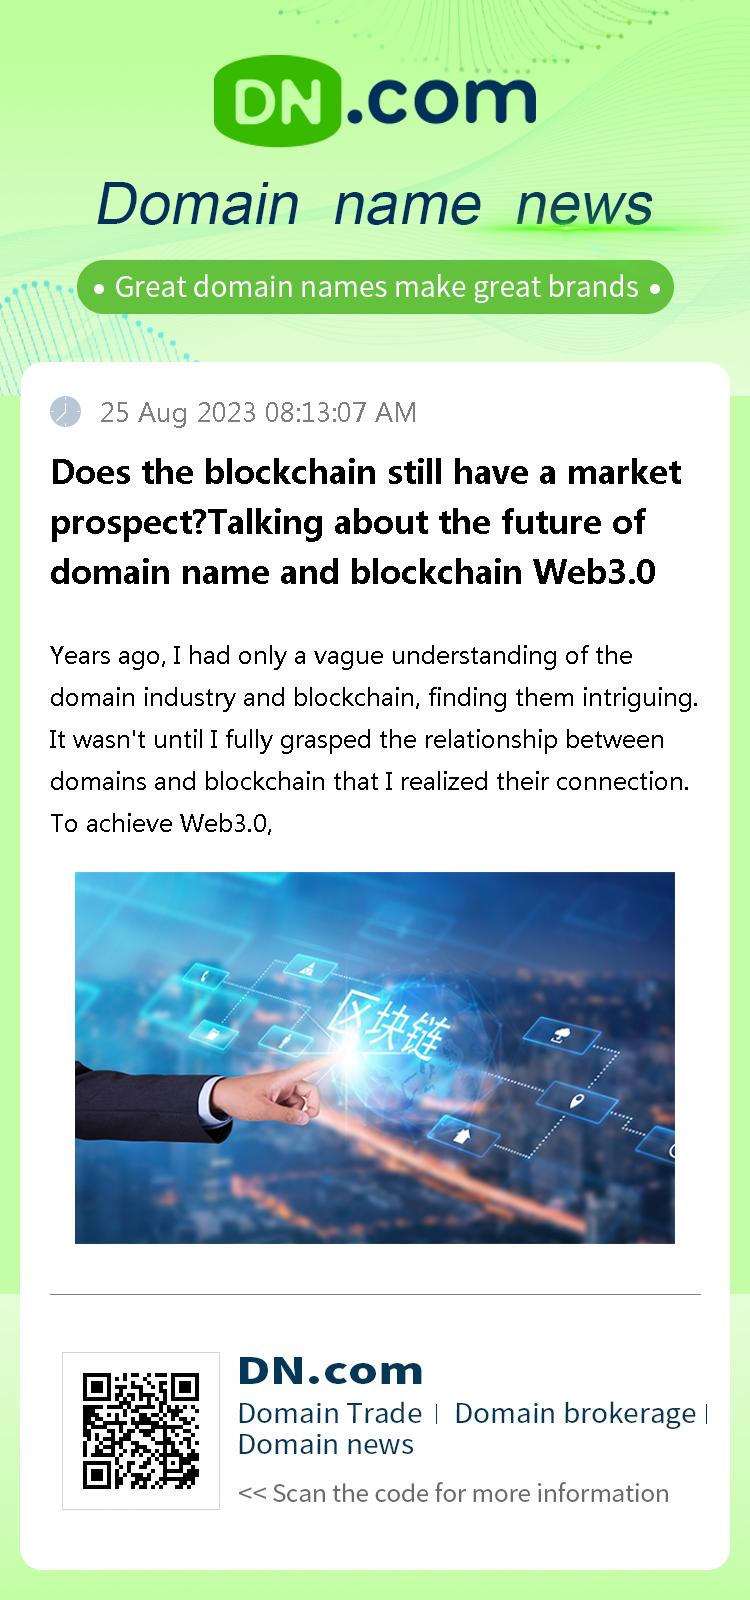 Does the blockchain still have a market prospect?Talking about the future of domain name and blockchain Web3.0